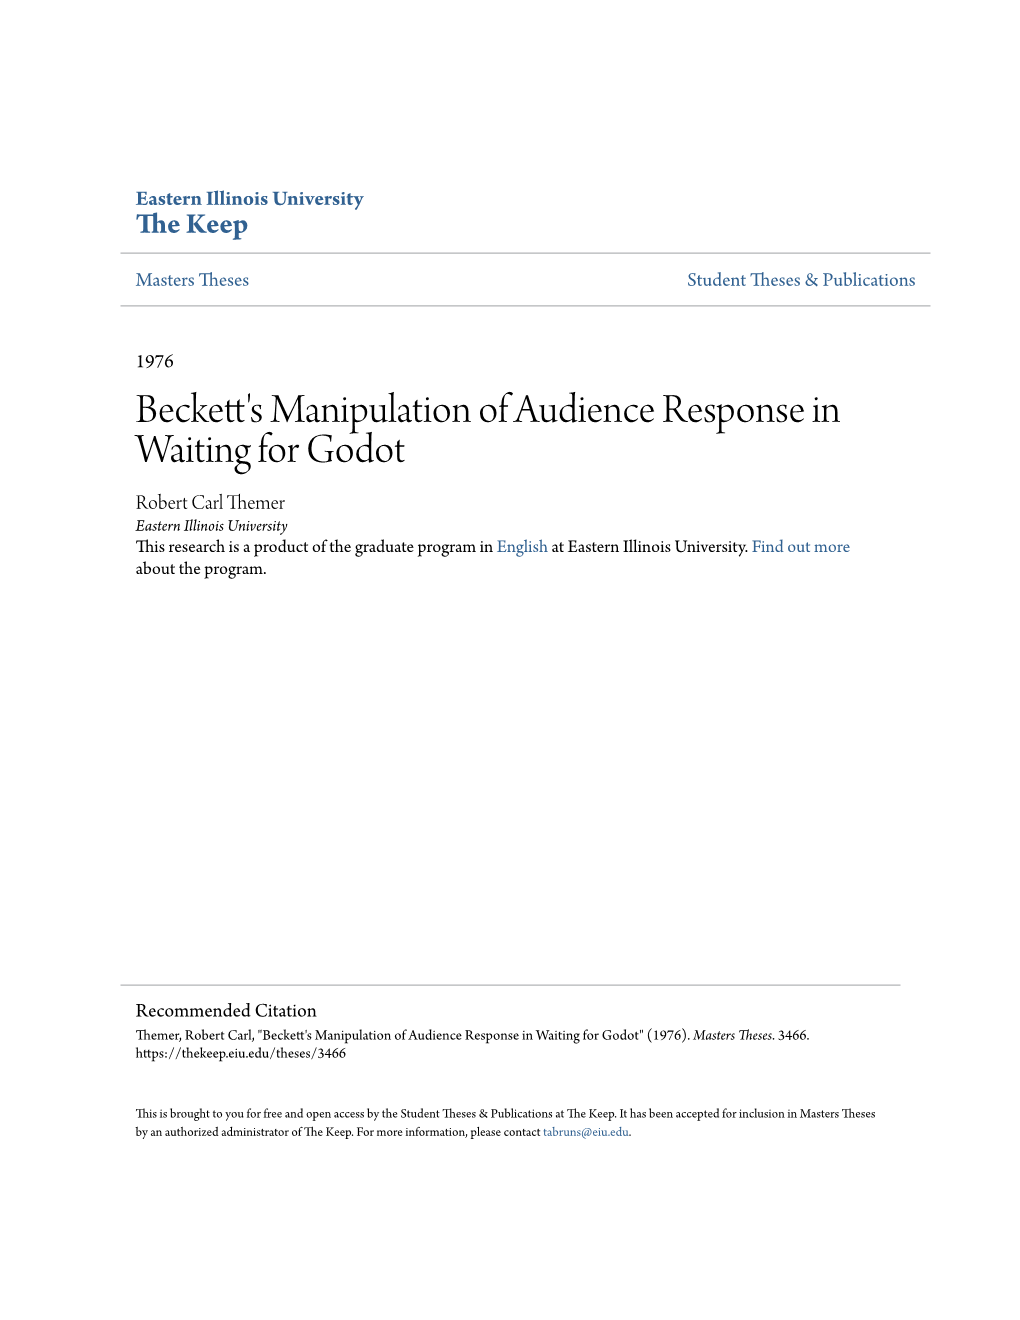 Beckett's Manipulation of Audience Response in Waiting for Godot